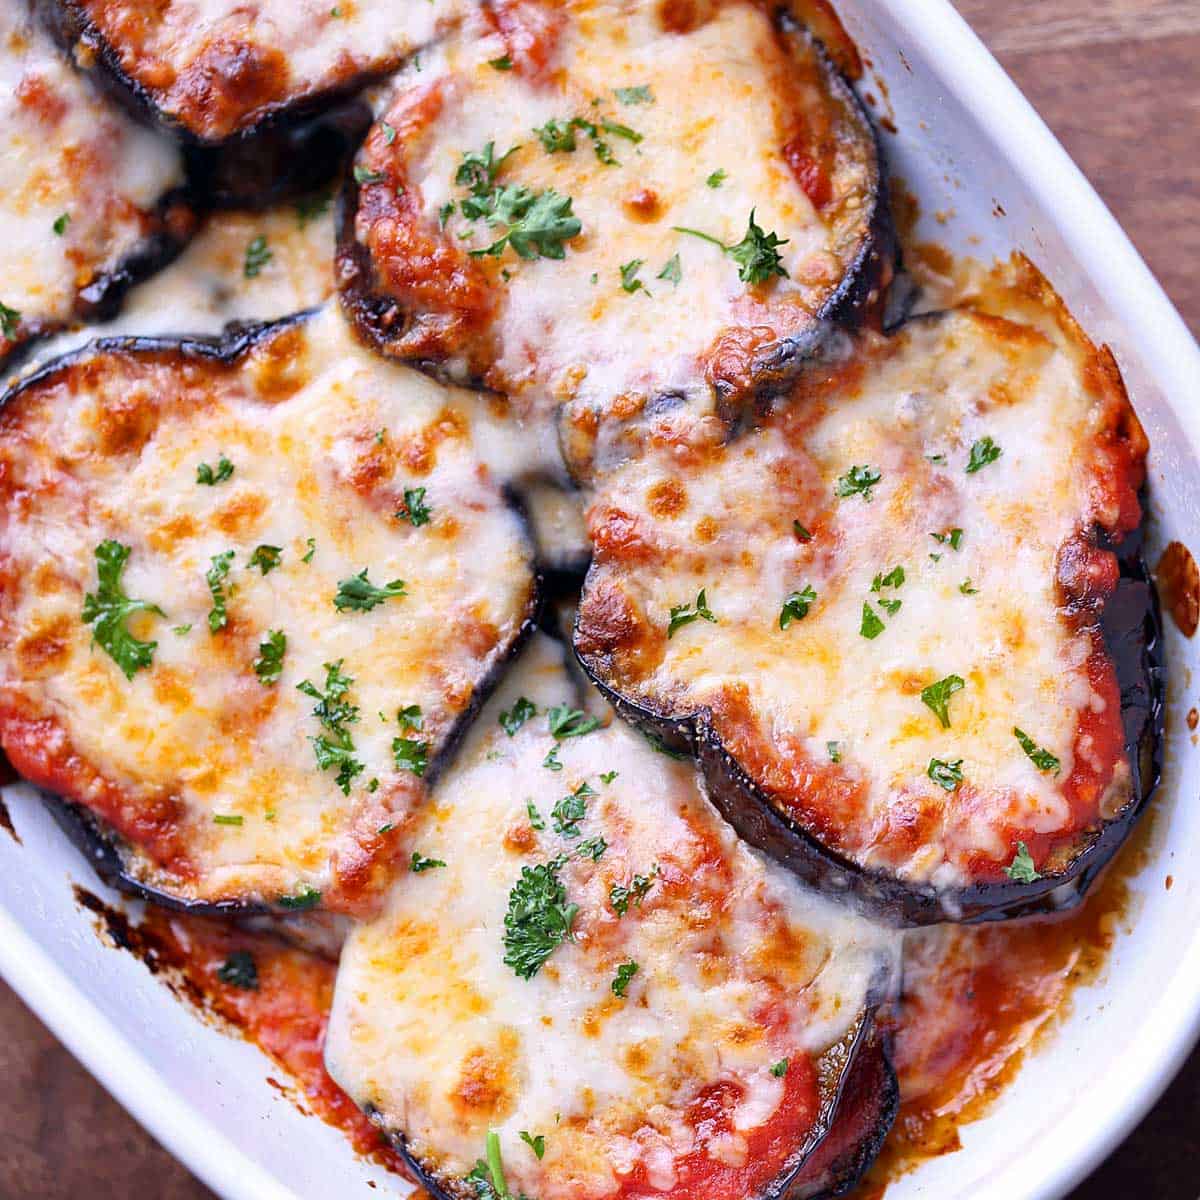 Here's How to Freeze Eggplant So It Lasts All Year